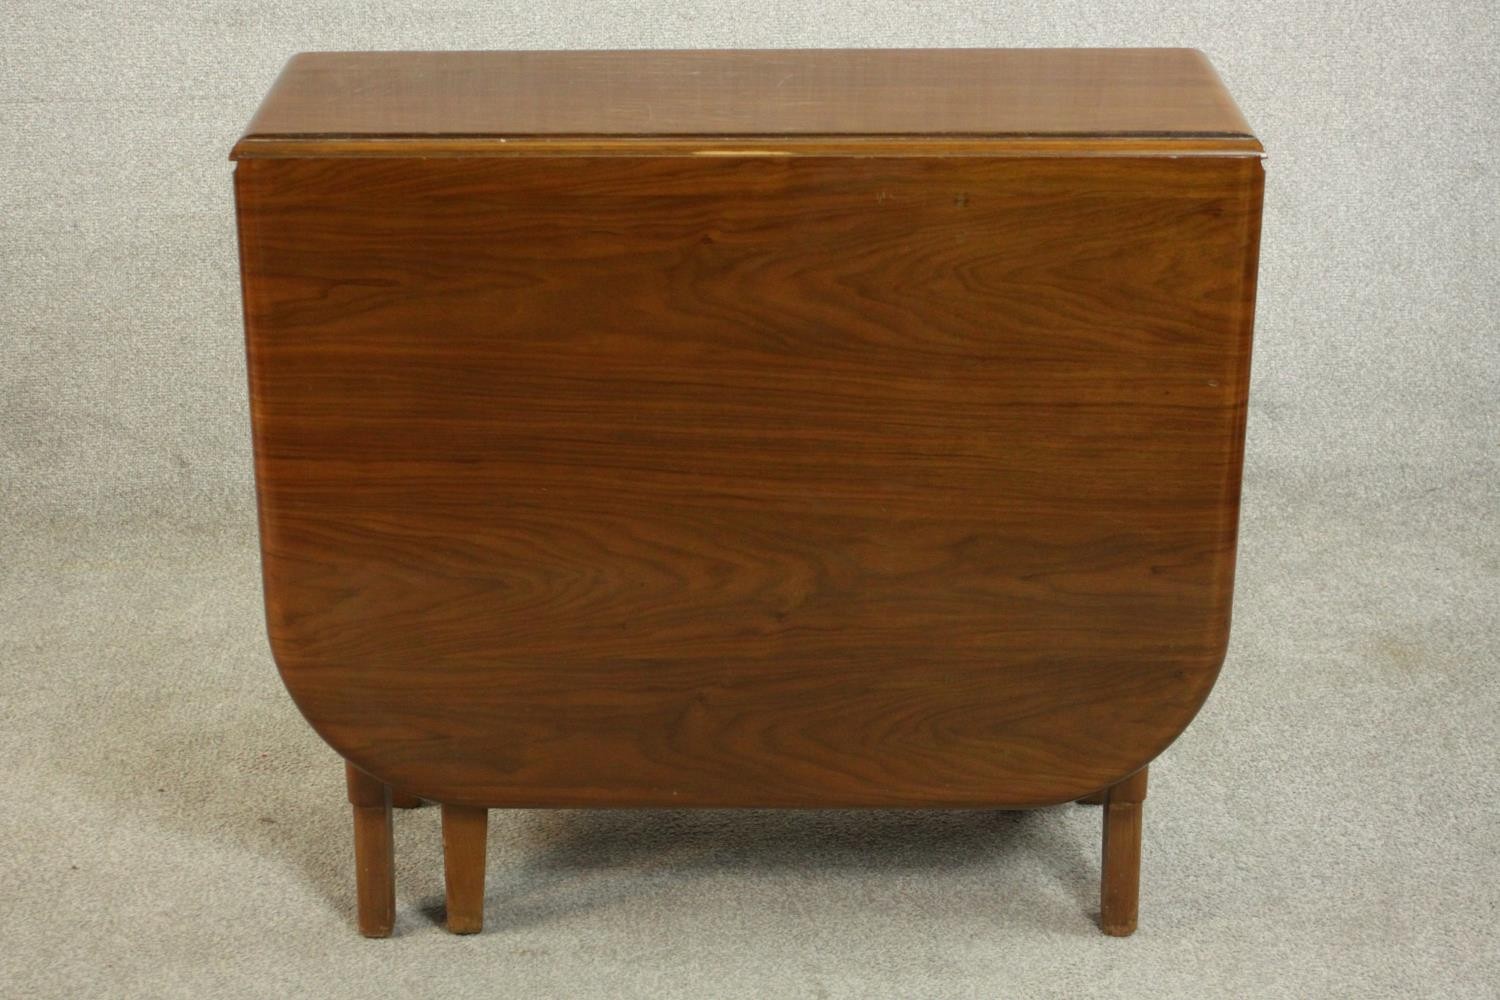 A mid 20th century walnut drop leaf dining table, the two leaves with rounded corners on a base with - Image 6 of 9